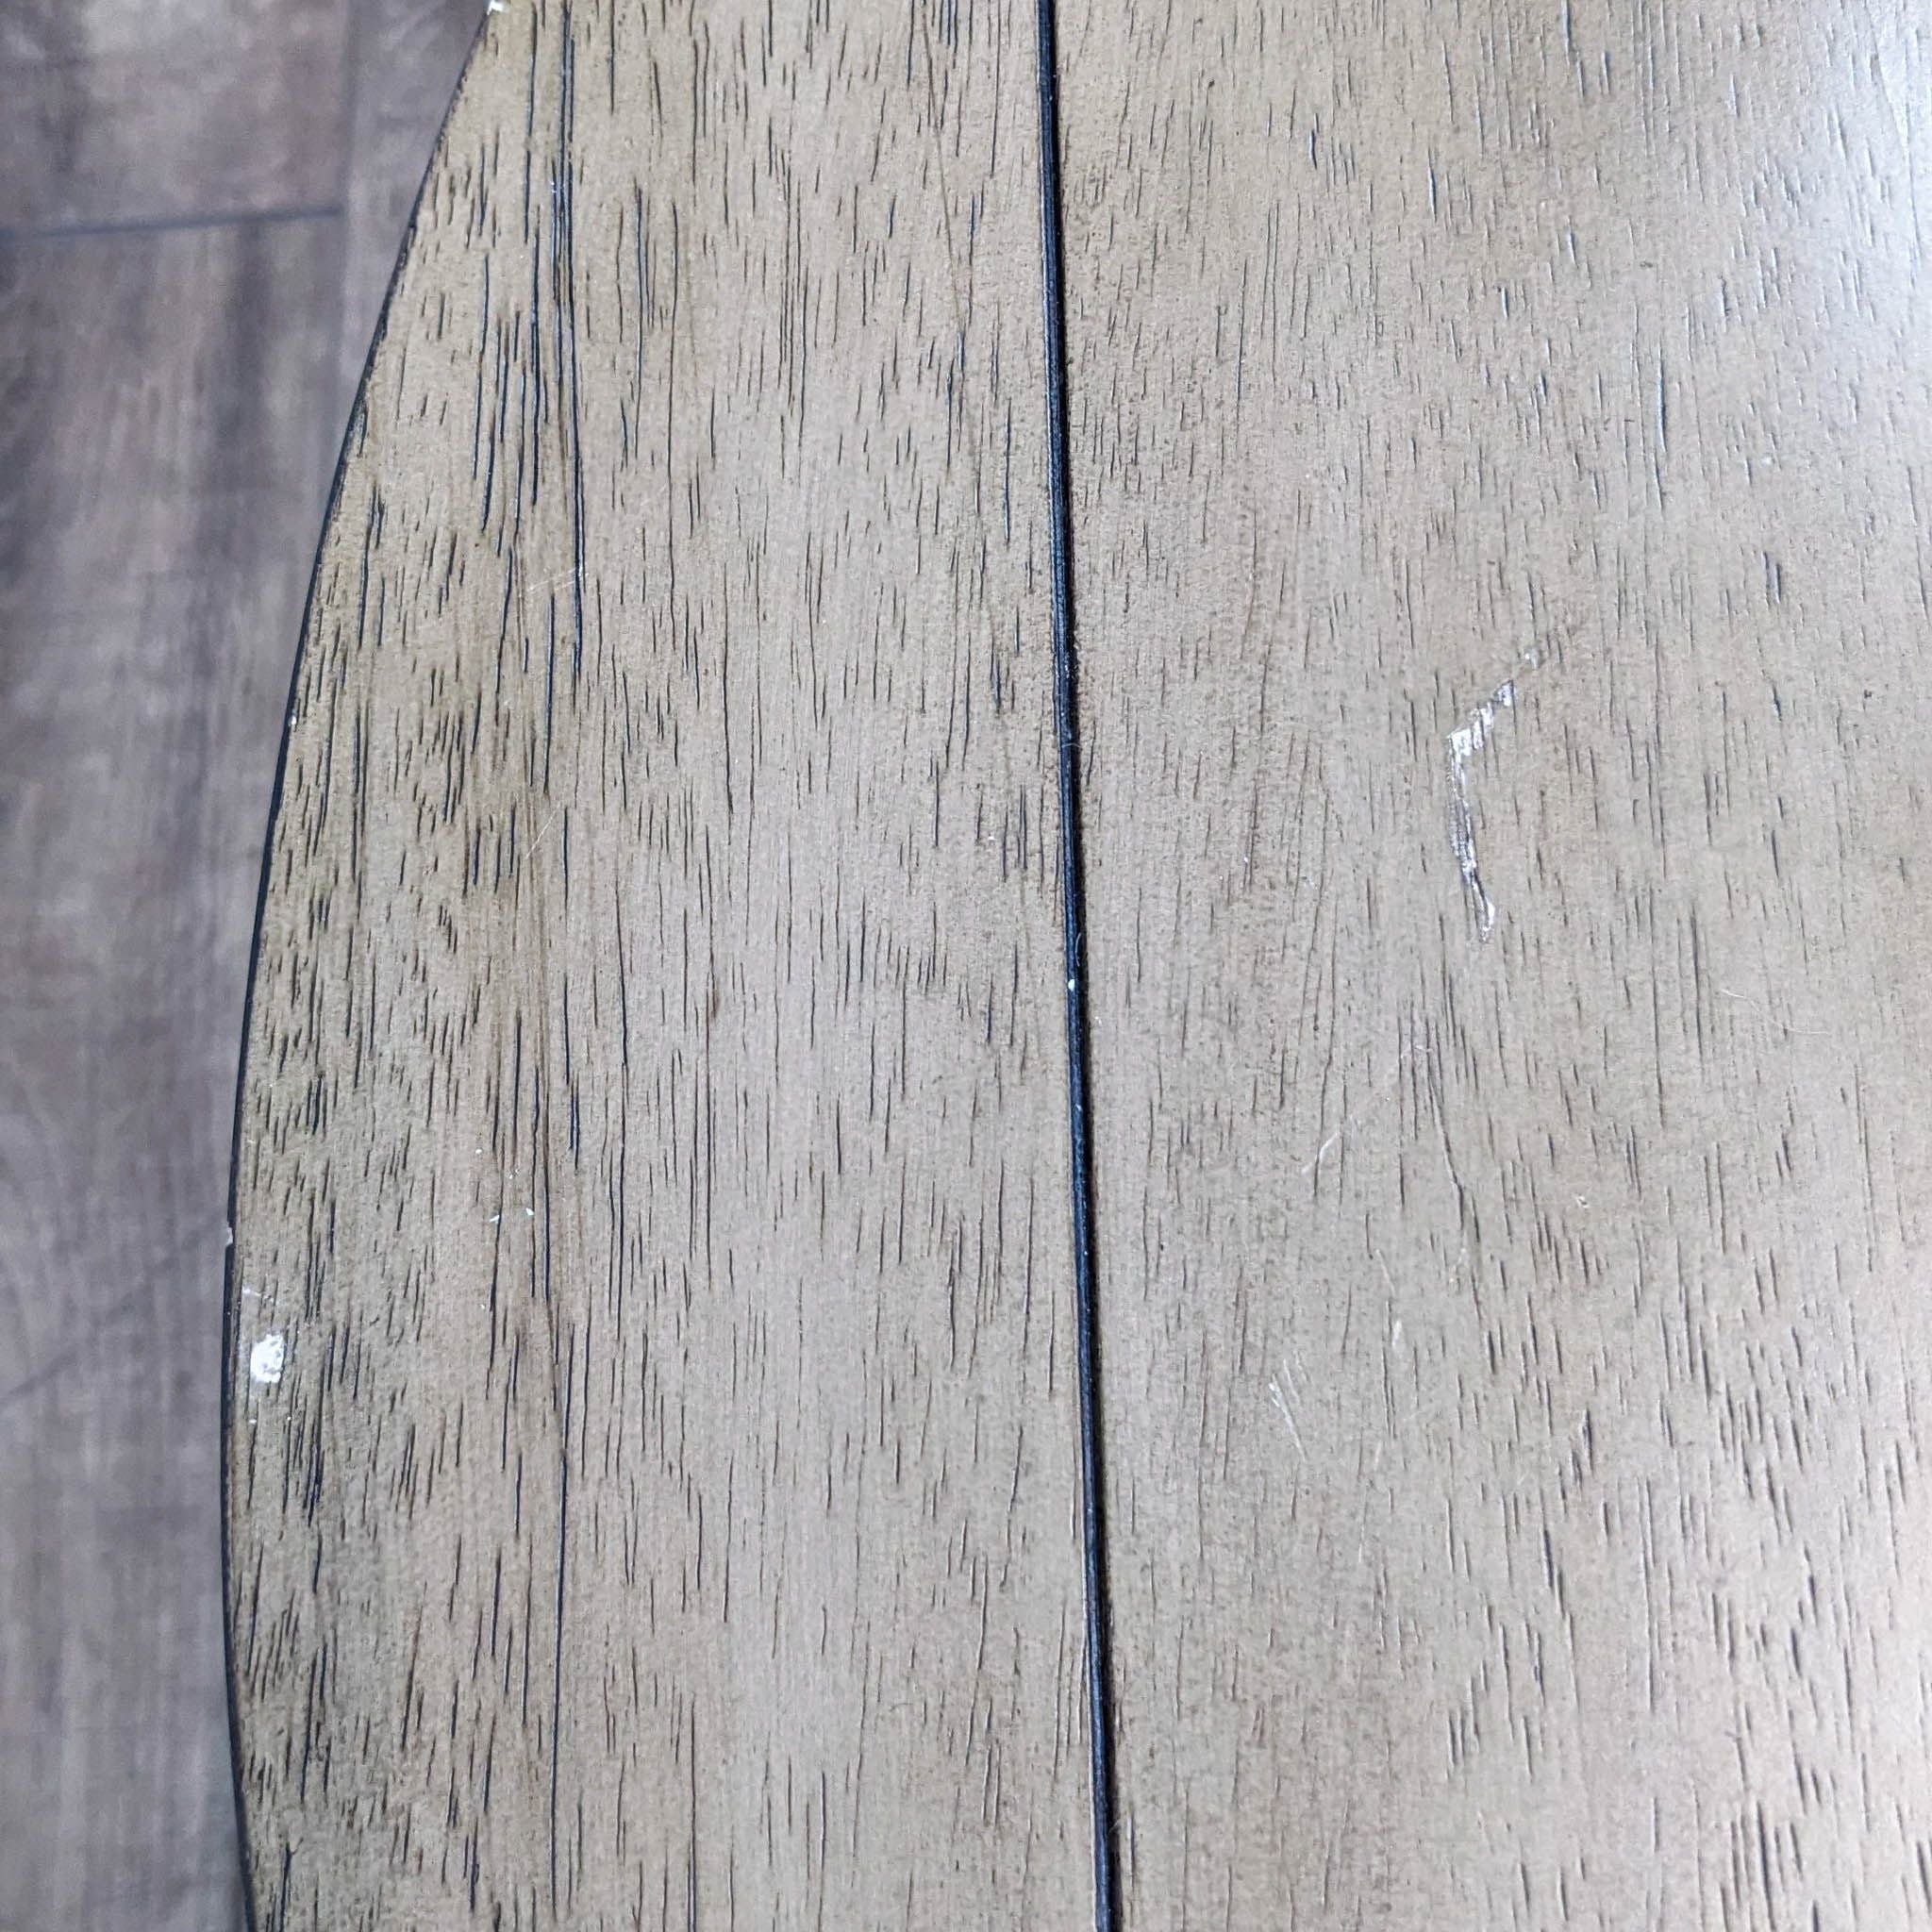 Close-up texture detail of Reperch coffee table showing wood grain on planked surface. Simple, subdued lighting.